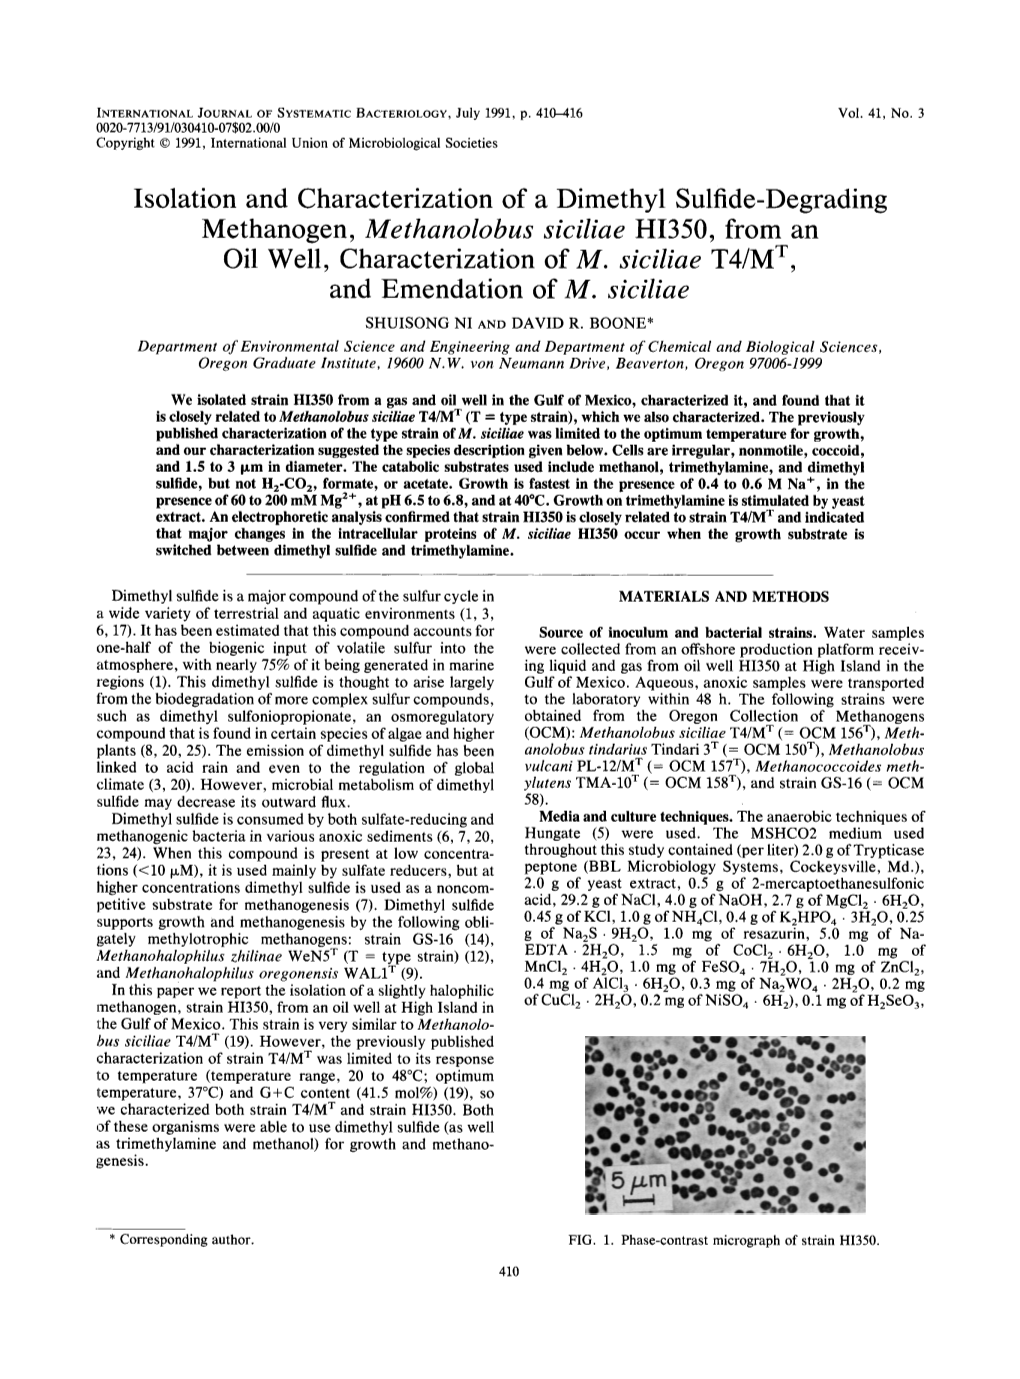 Isolation and Characterization of a Dimethyl Sulfide-Degrading Methanogen, Methanolobus Siciliae HI350, from an Oil Well, Characterization of M